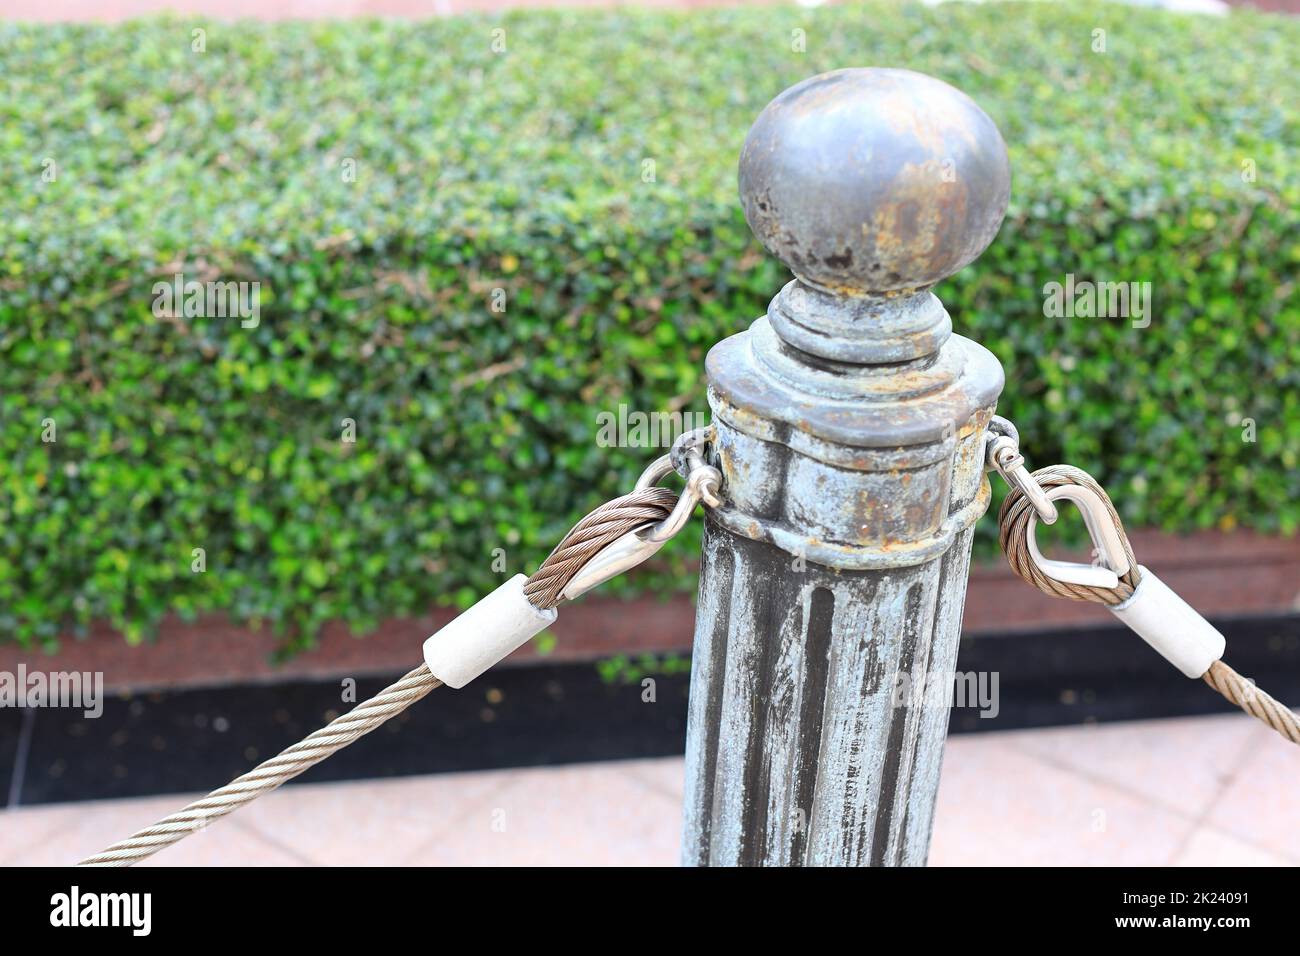 pole with metal restraining rope. Barrier, enclosed VIP area, protected entrance, private event, restrict area barricade pole. Stock Photo